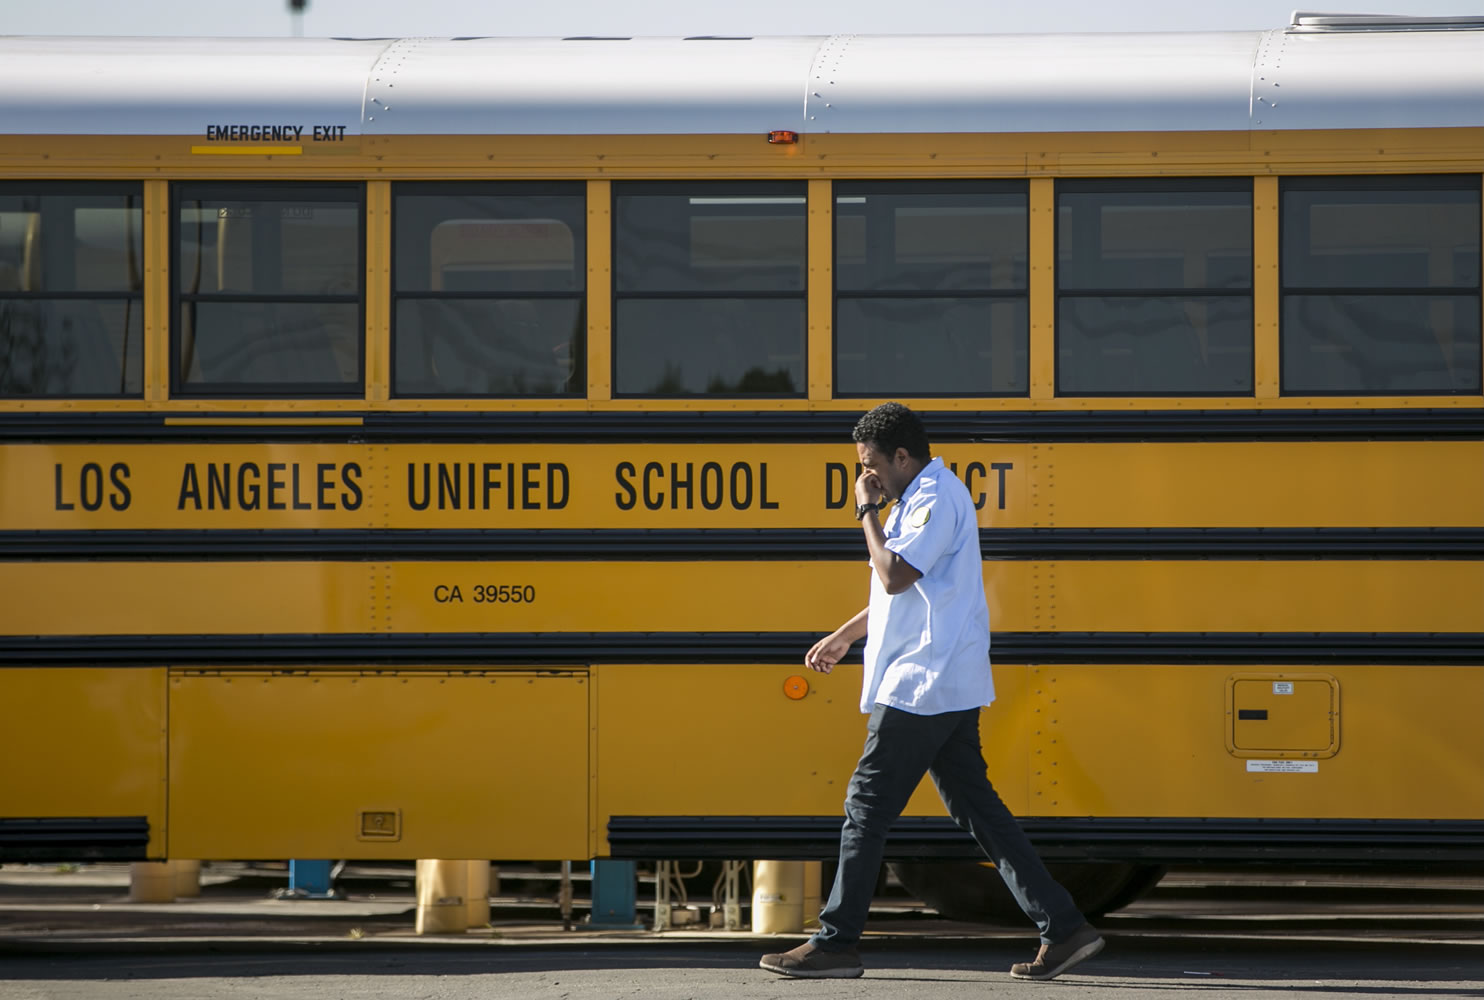 A Los Angeles Unified School District bus driver walks past parked vehicles at a bus garage in Gardena, Calif., on Tuesday.